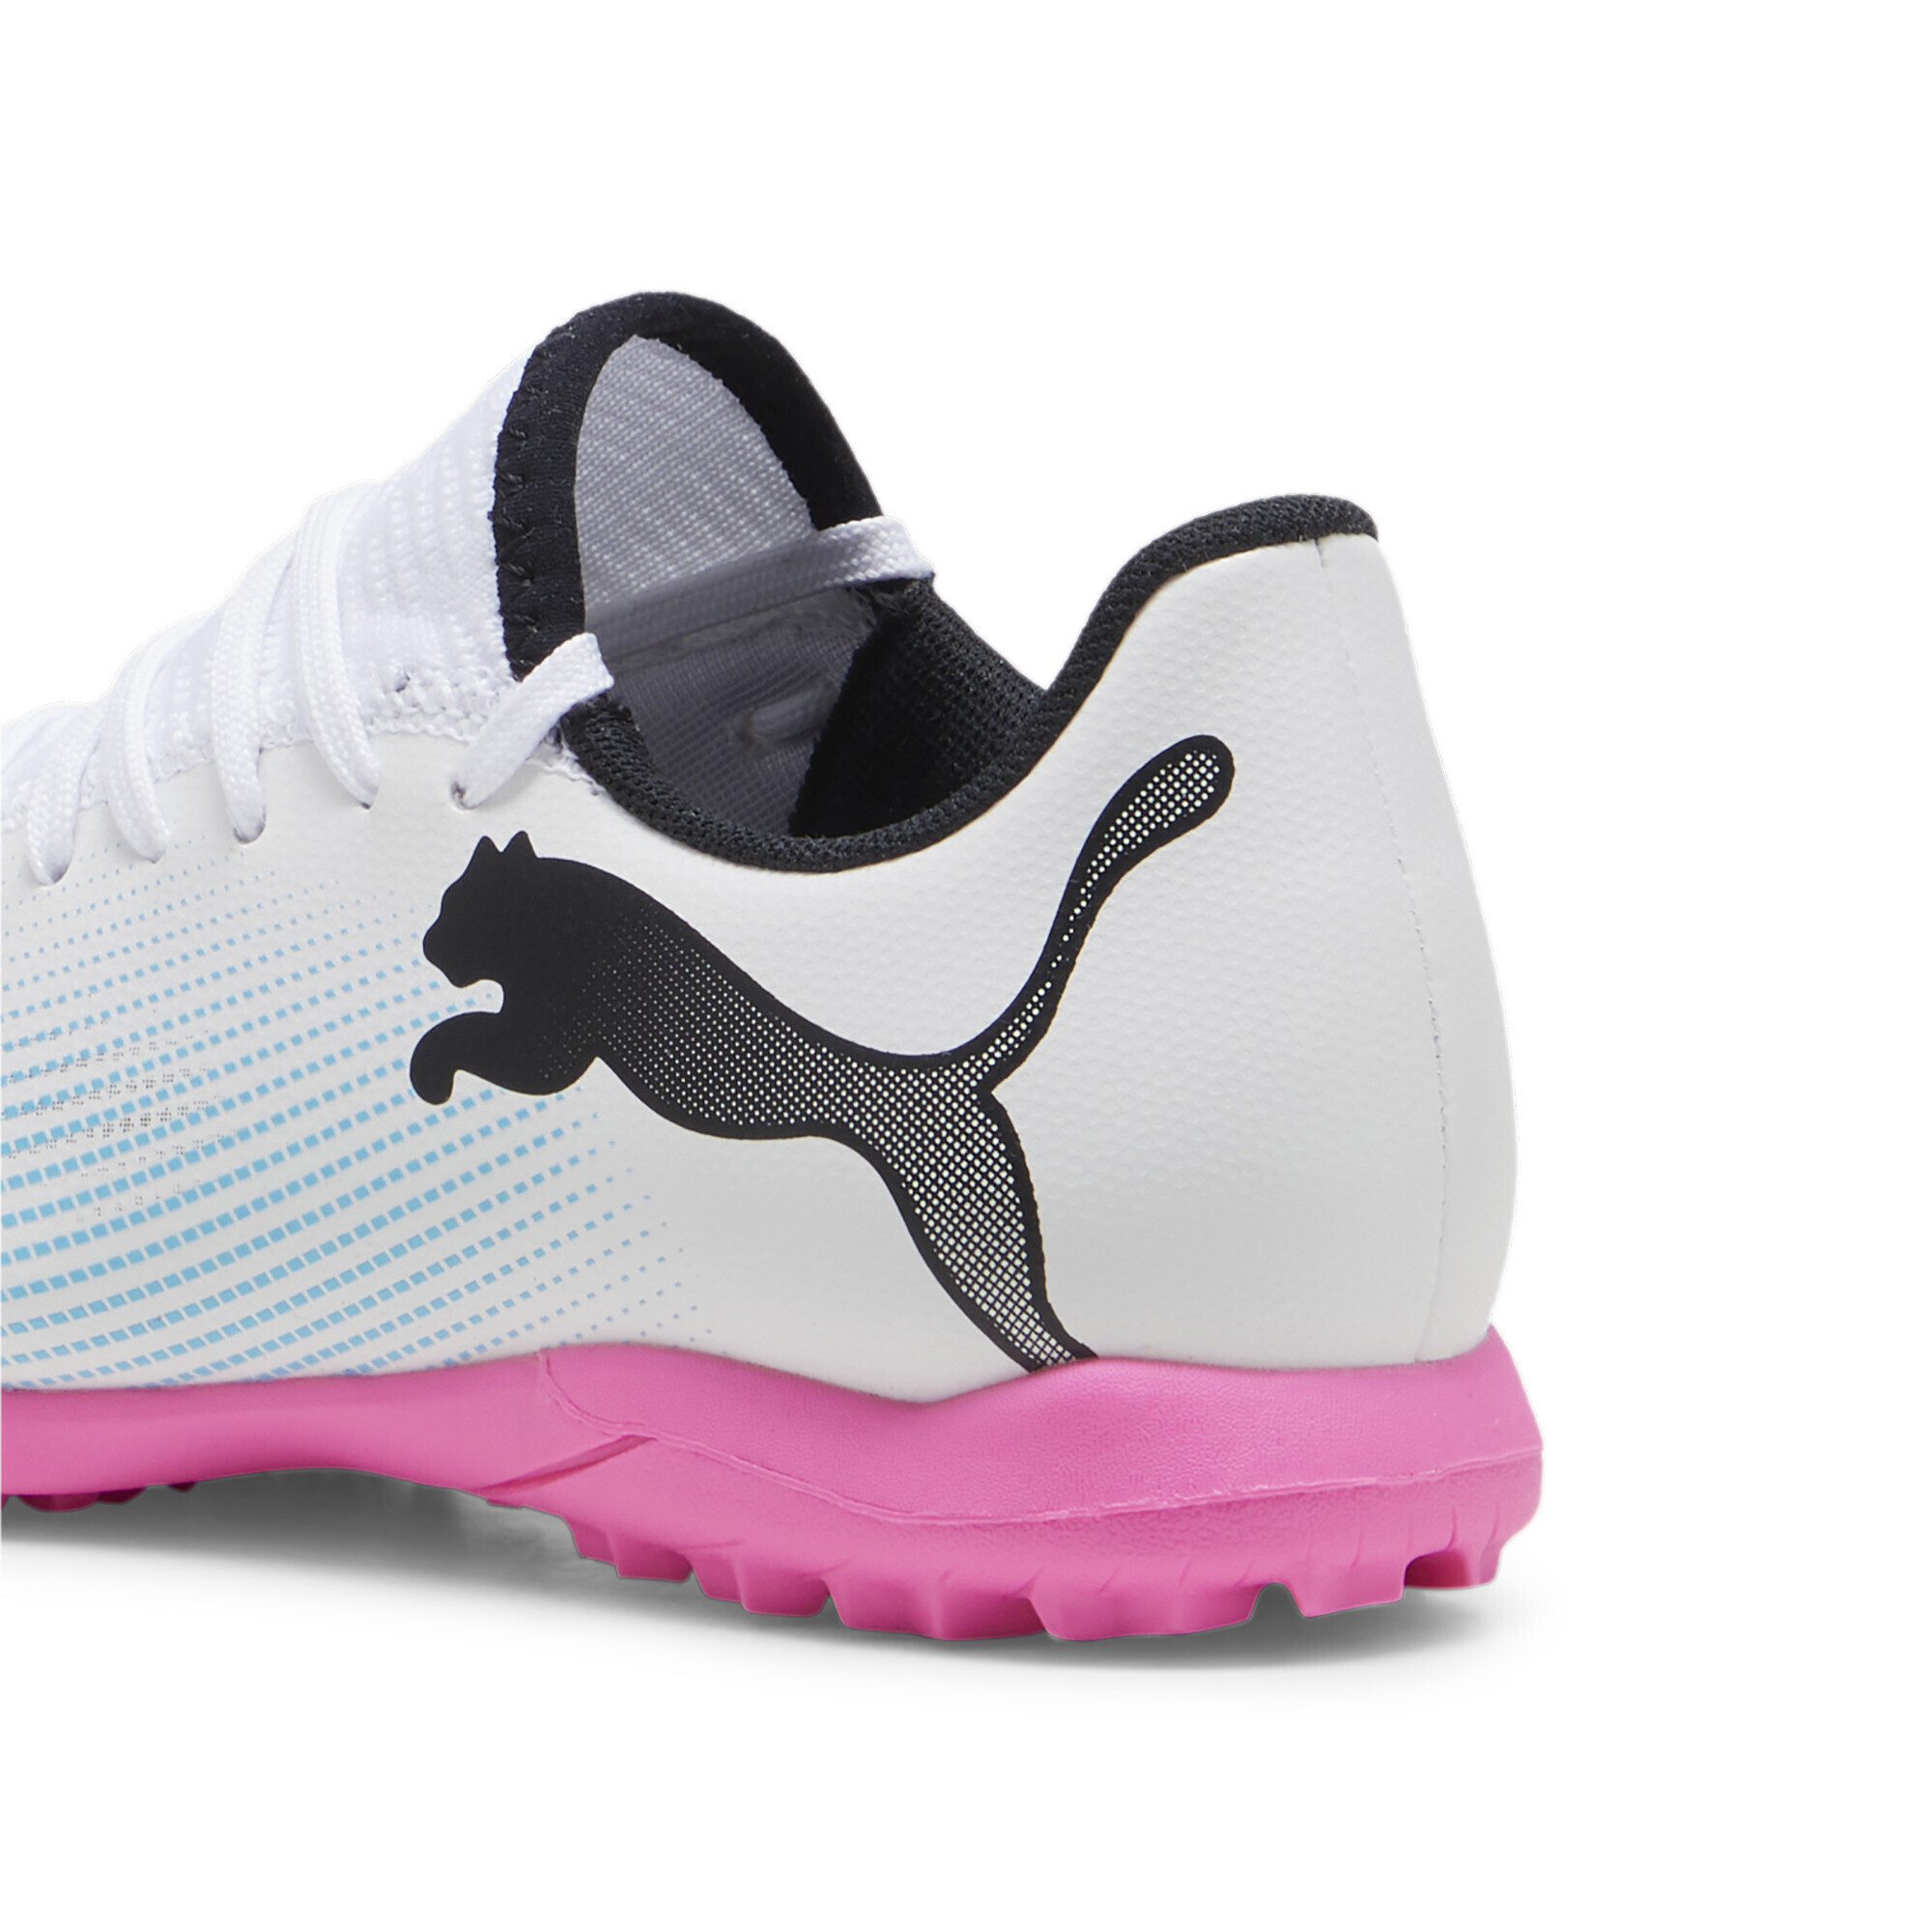 PUMA FUTURE 7 PLAY TT Youth Football Boots In White/Pink, Size EU 38